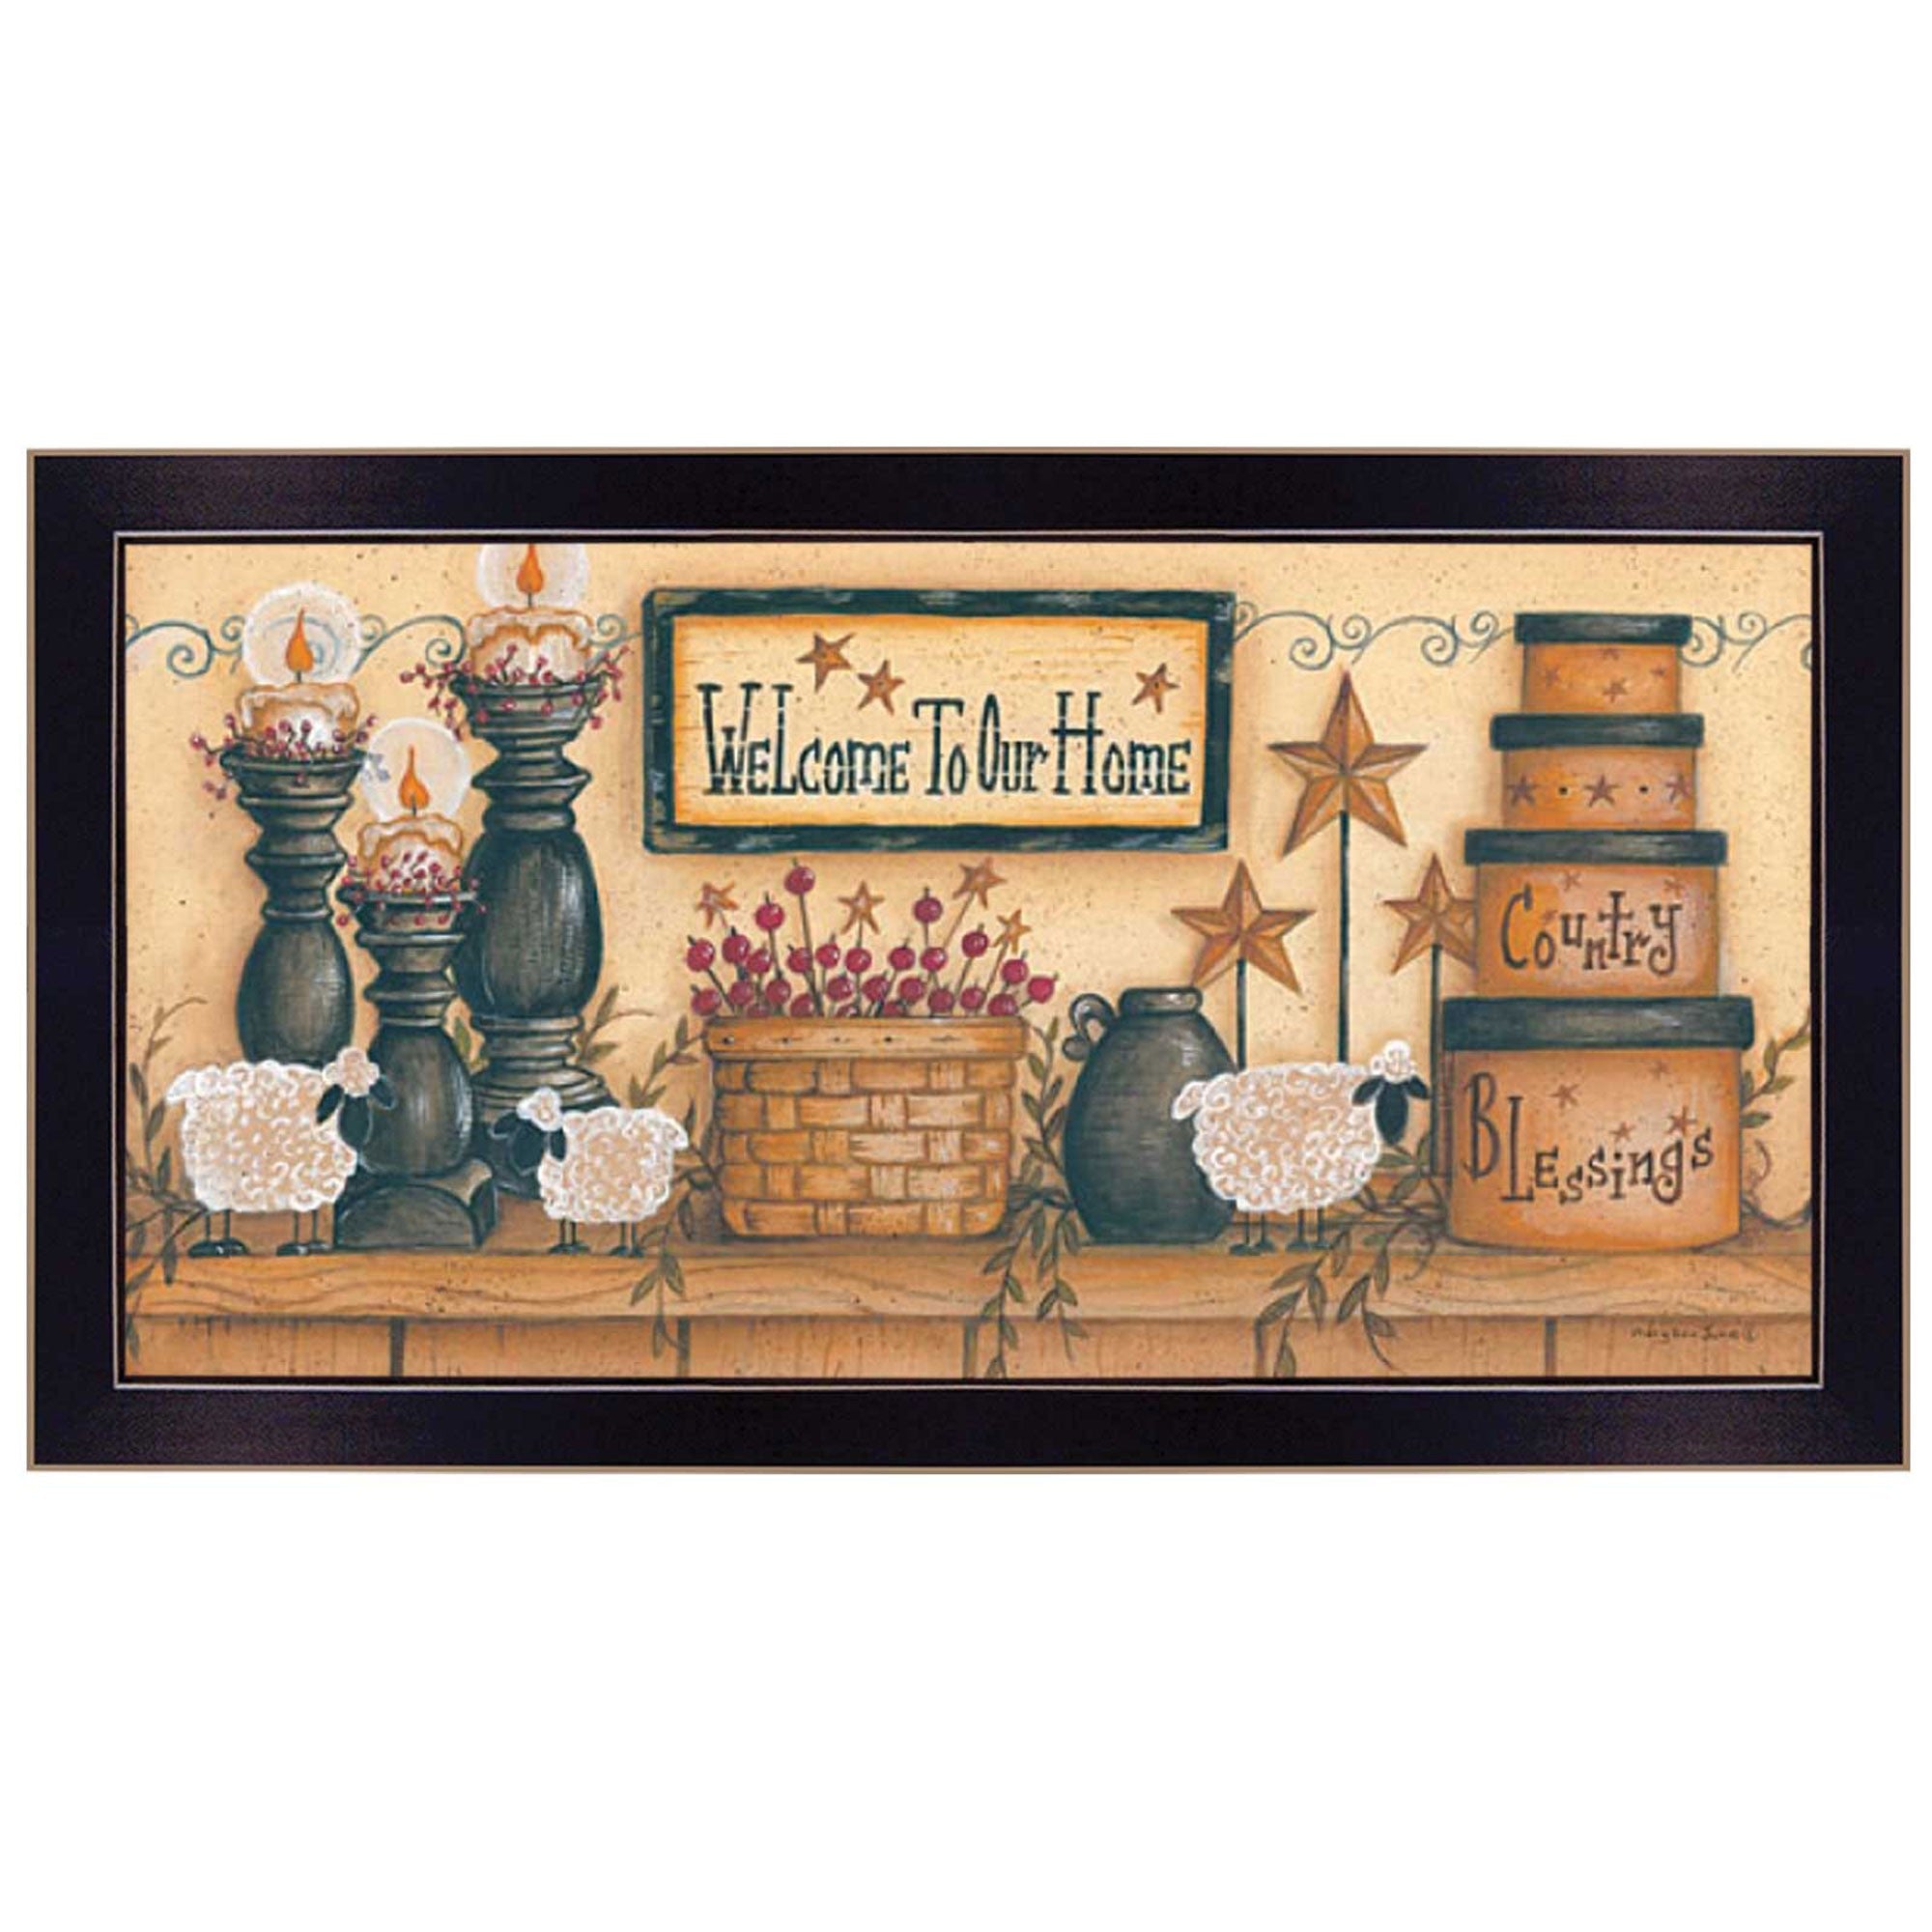 Welcome To Our Home 2 Black Framed Print Wall Art